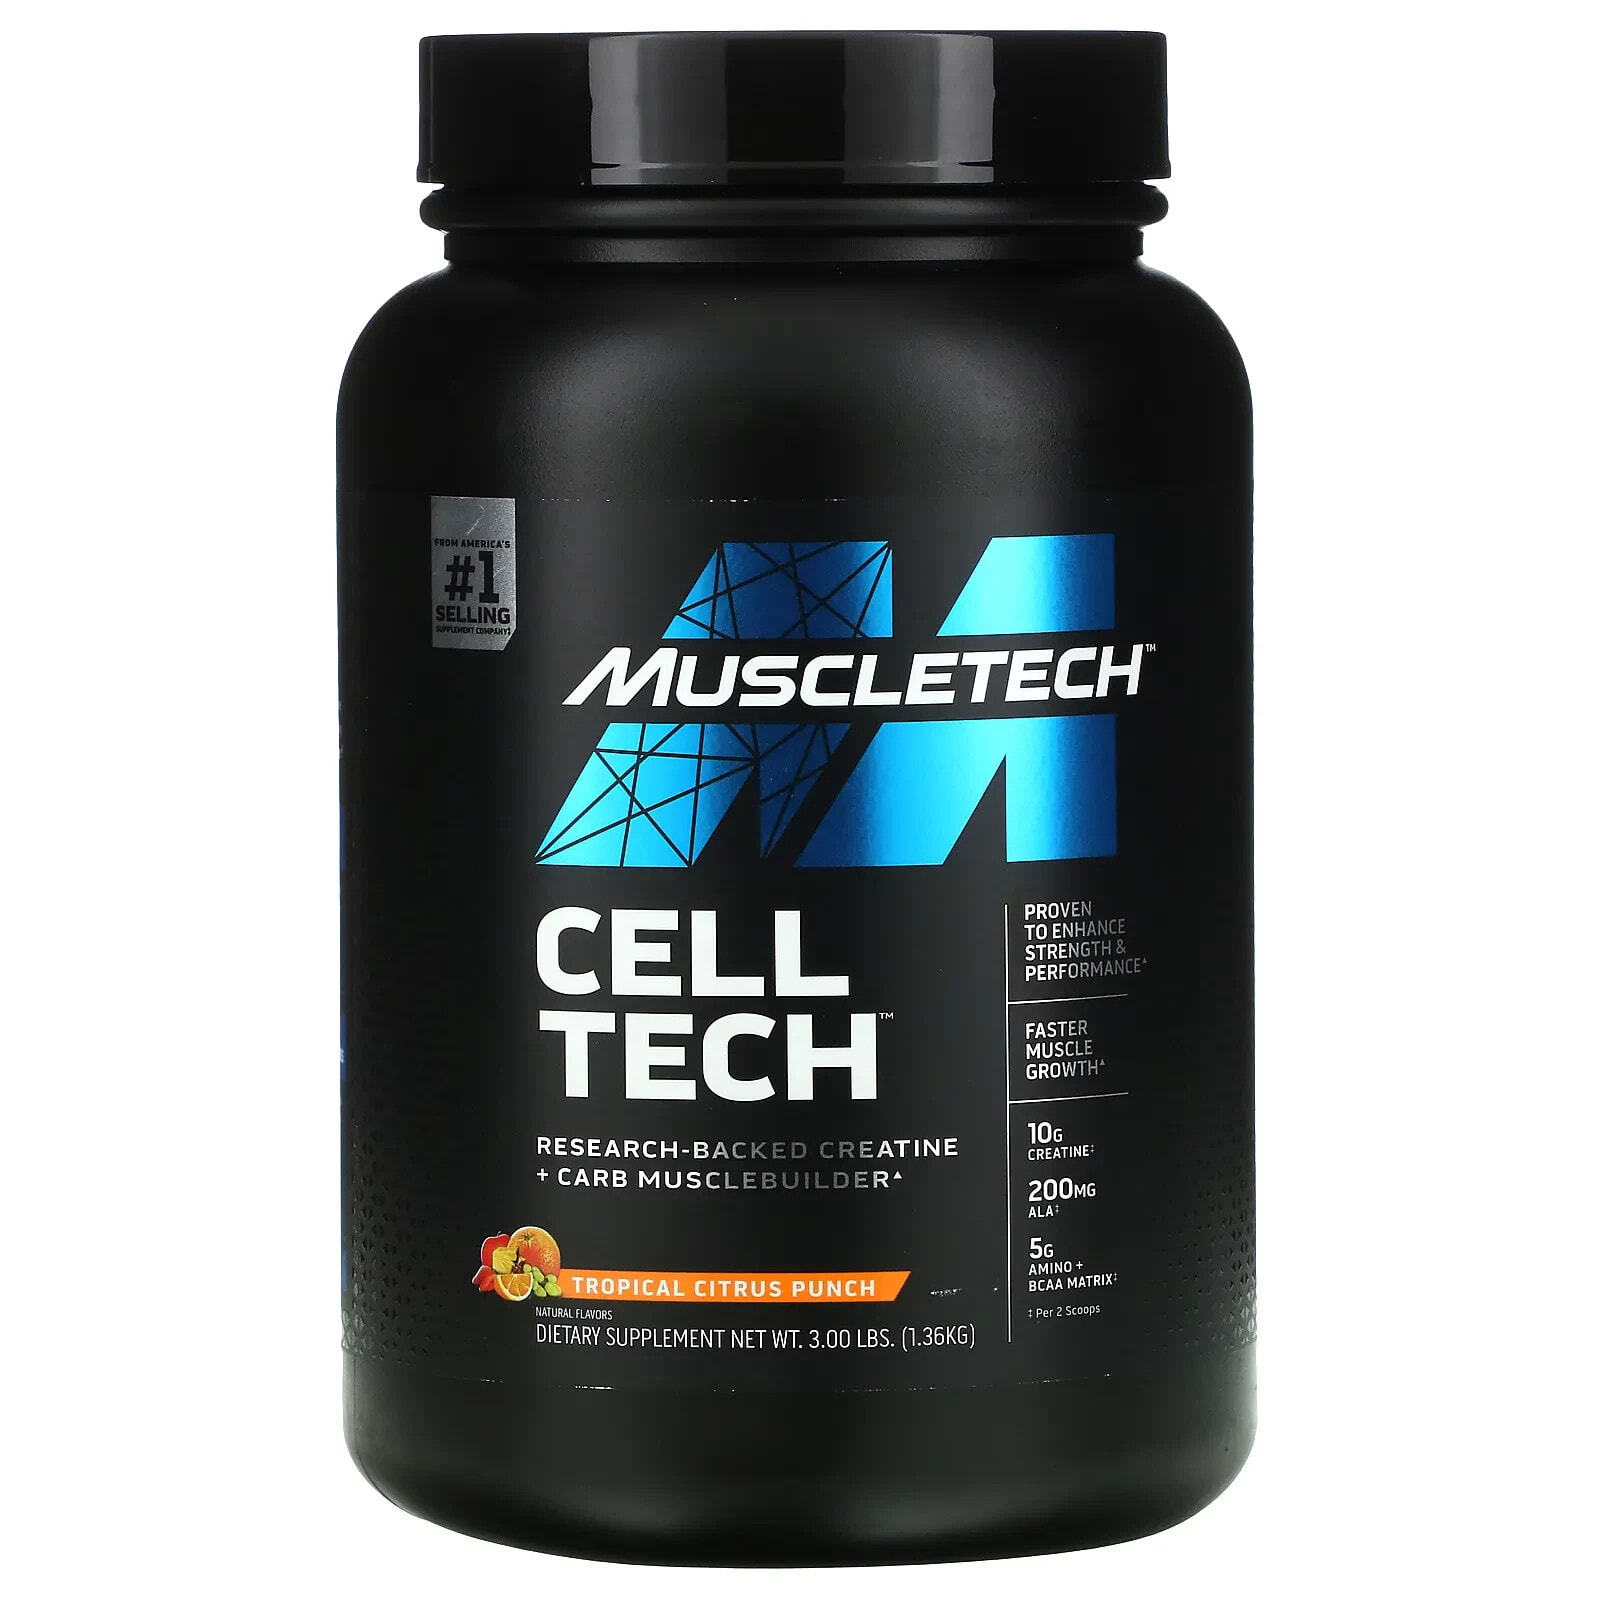 Cell Tech, Research-Backed Creatine + Carb Musclebuilder, Tropical Citrus Punch, 3 lbs (1.36 kg)